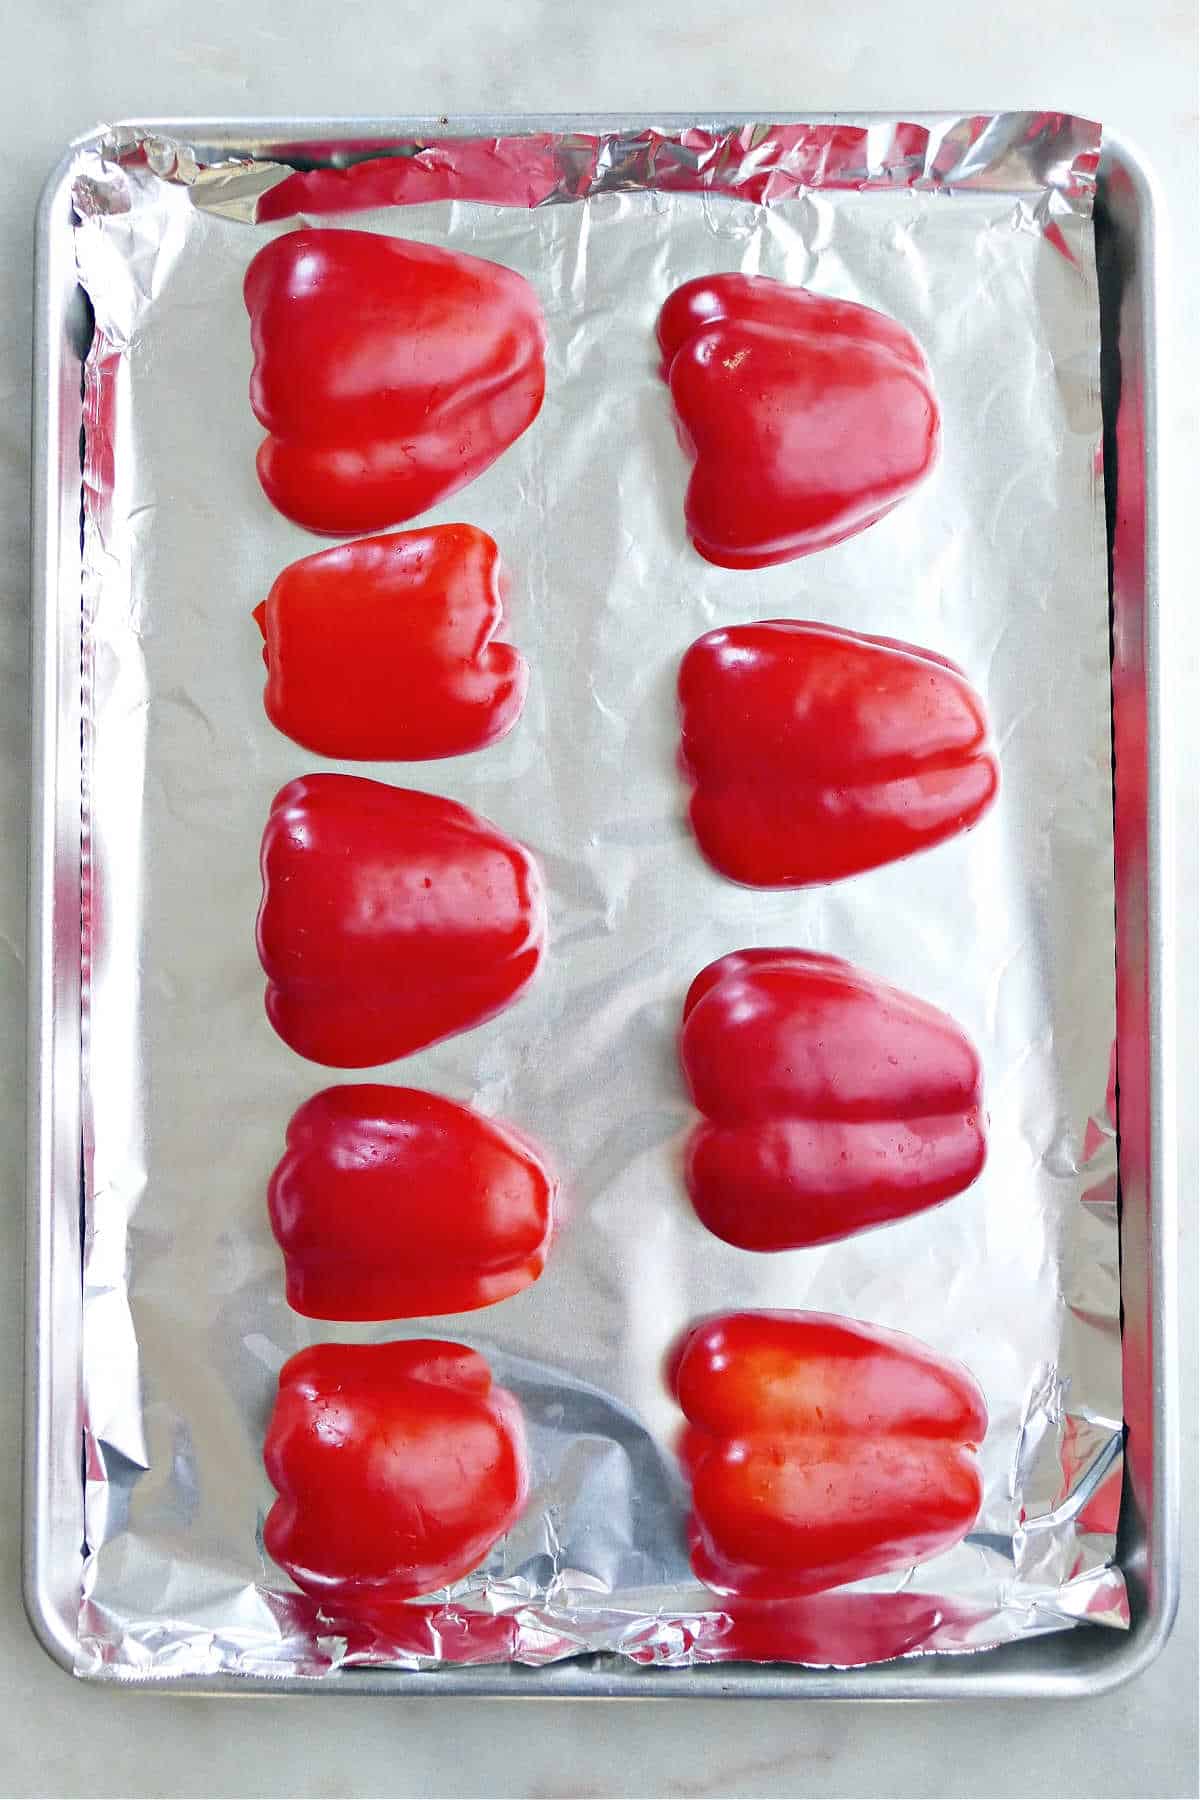 nine halves of red bell peppers on a baking sheet with foil